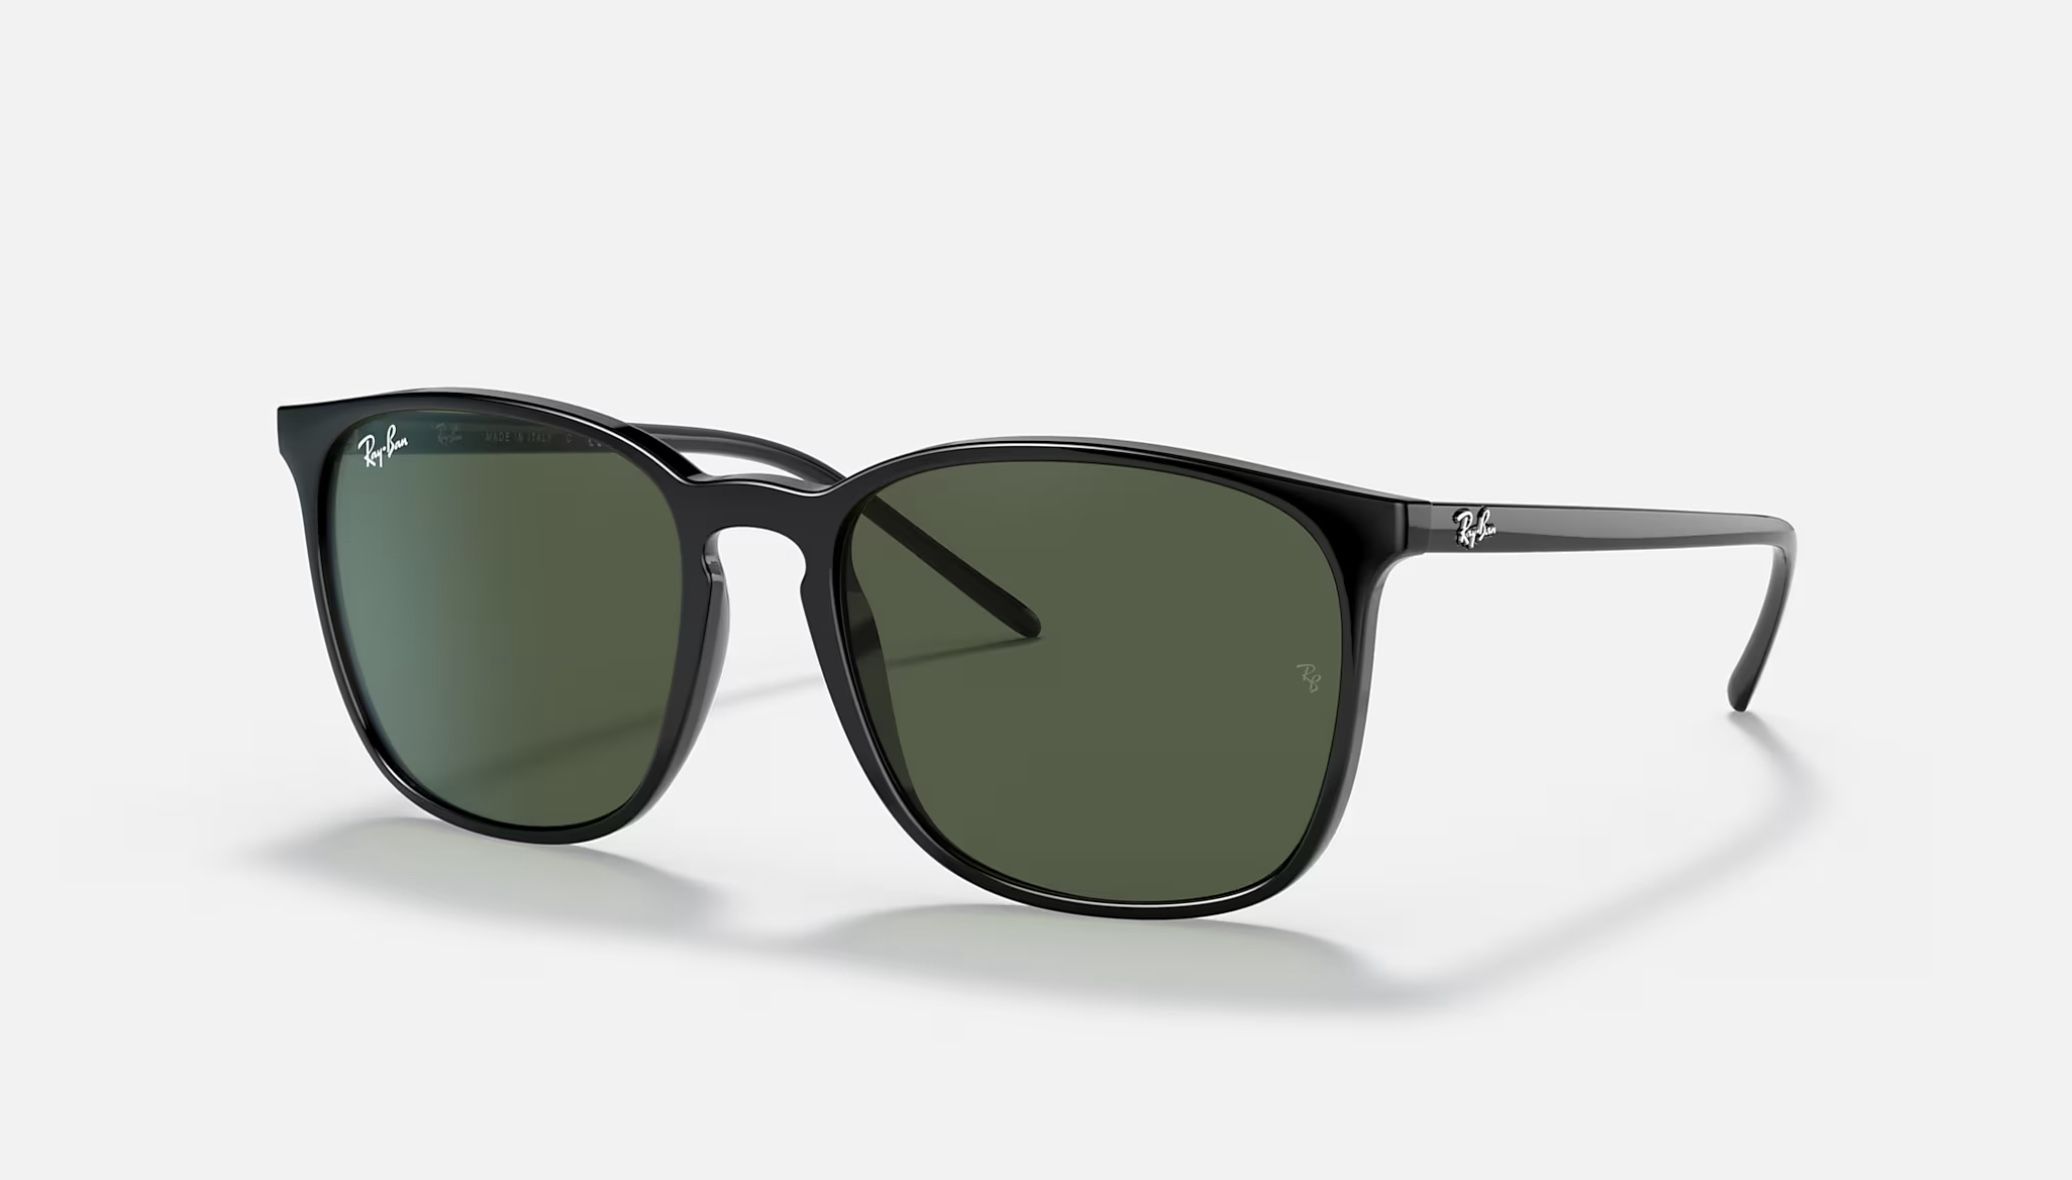 100% Authentic Ray Ban Sunglasses